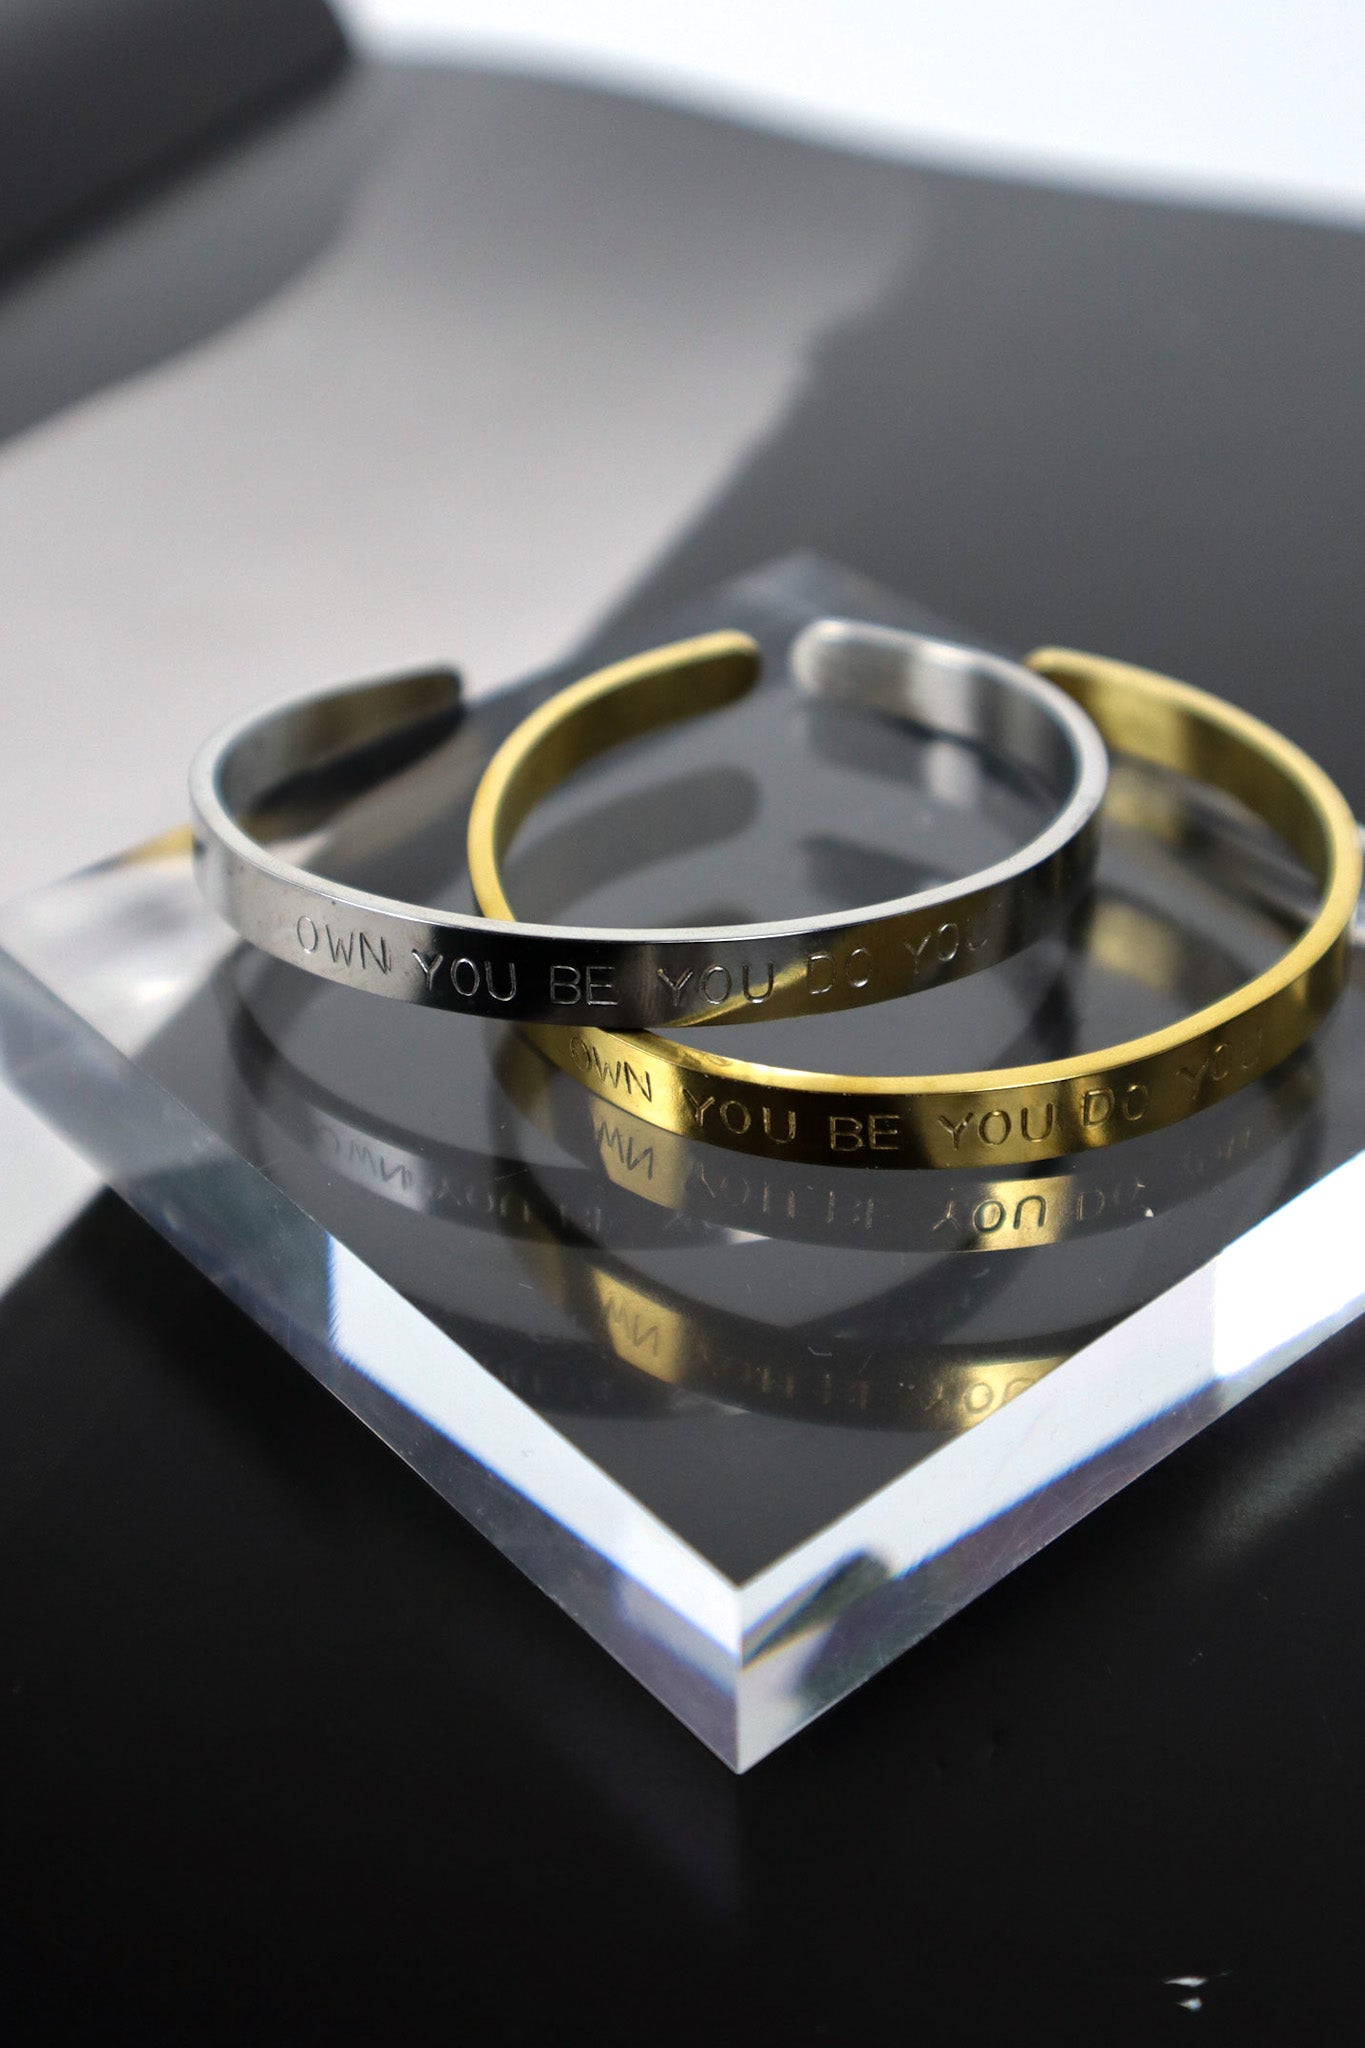 OWN YOU BE YOU DO YOU WATER RESISTANT CUFF - SILVER/GOLD